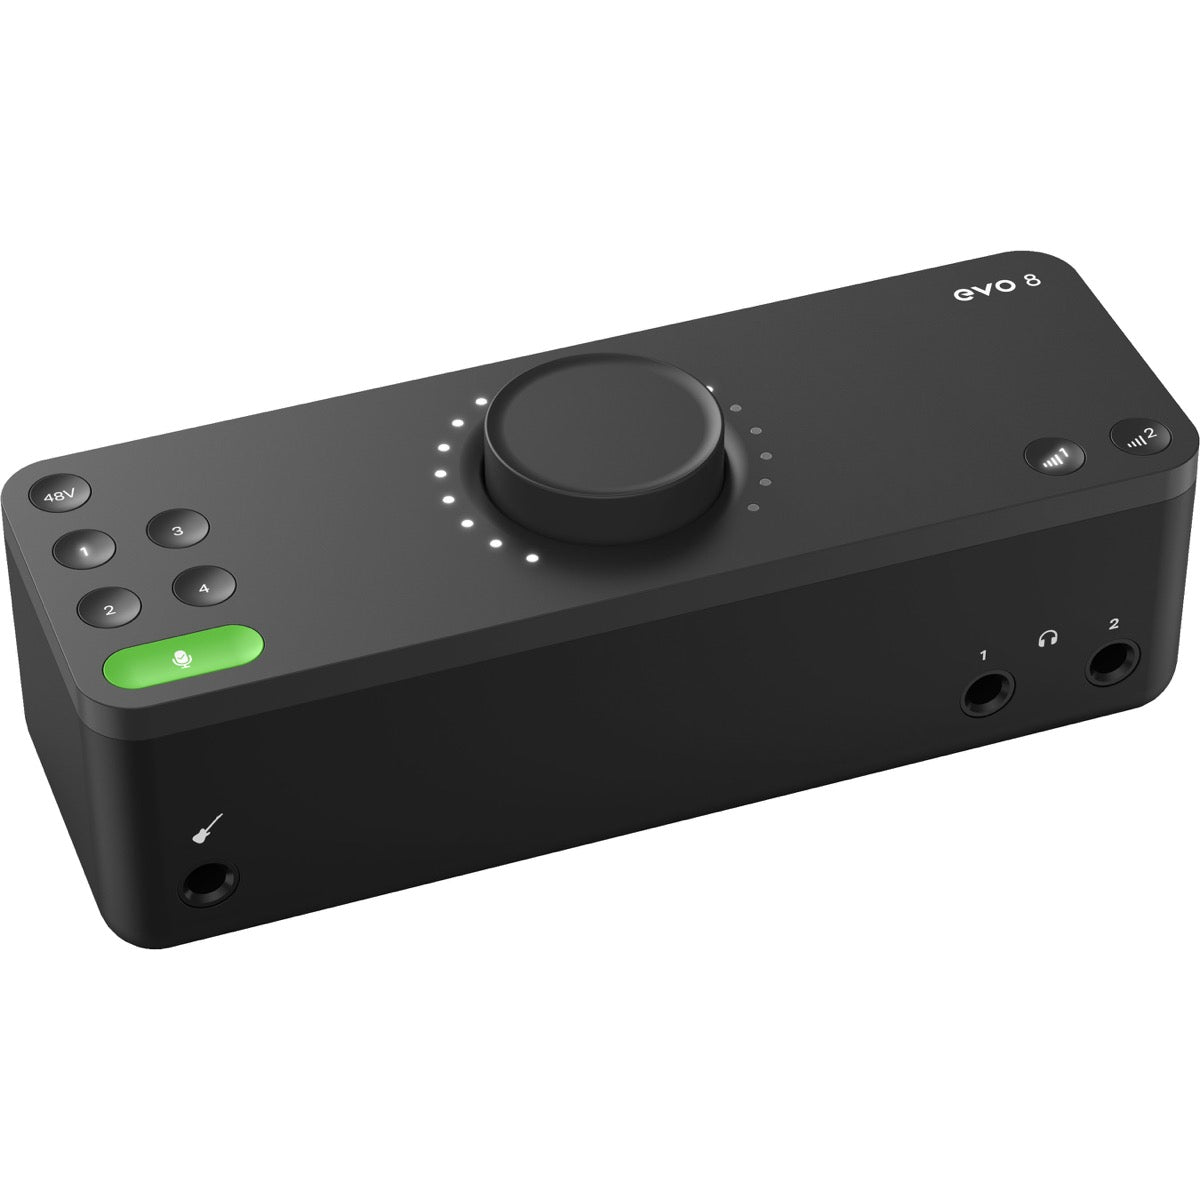 Audient Evo 8 4in/4out USB-C Audio Interface View 5